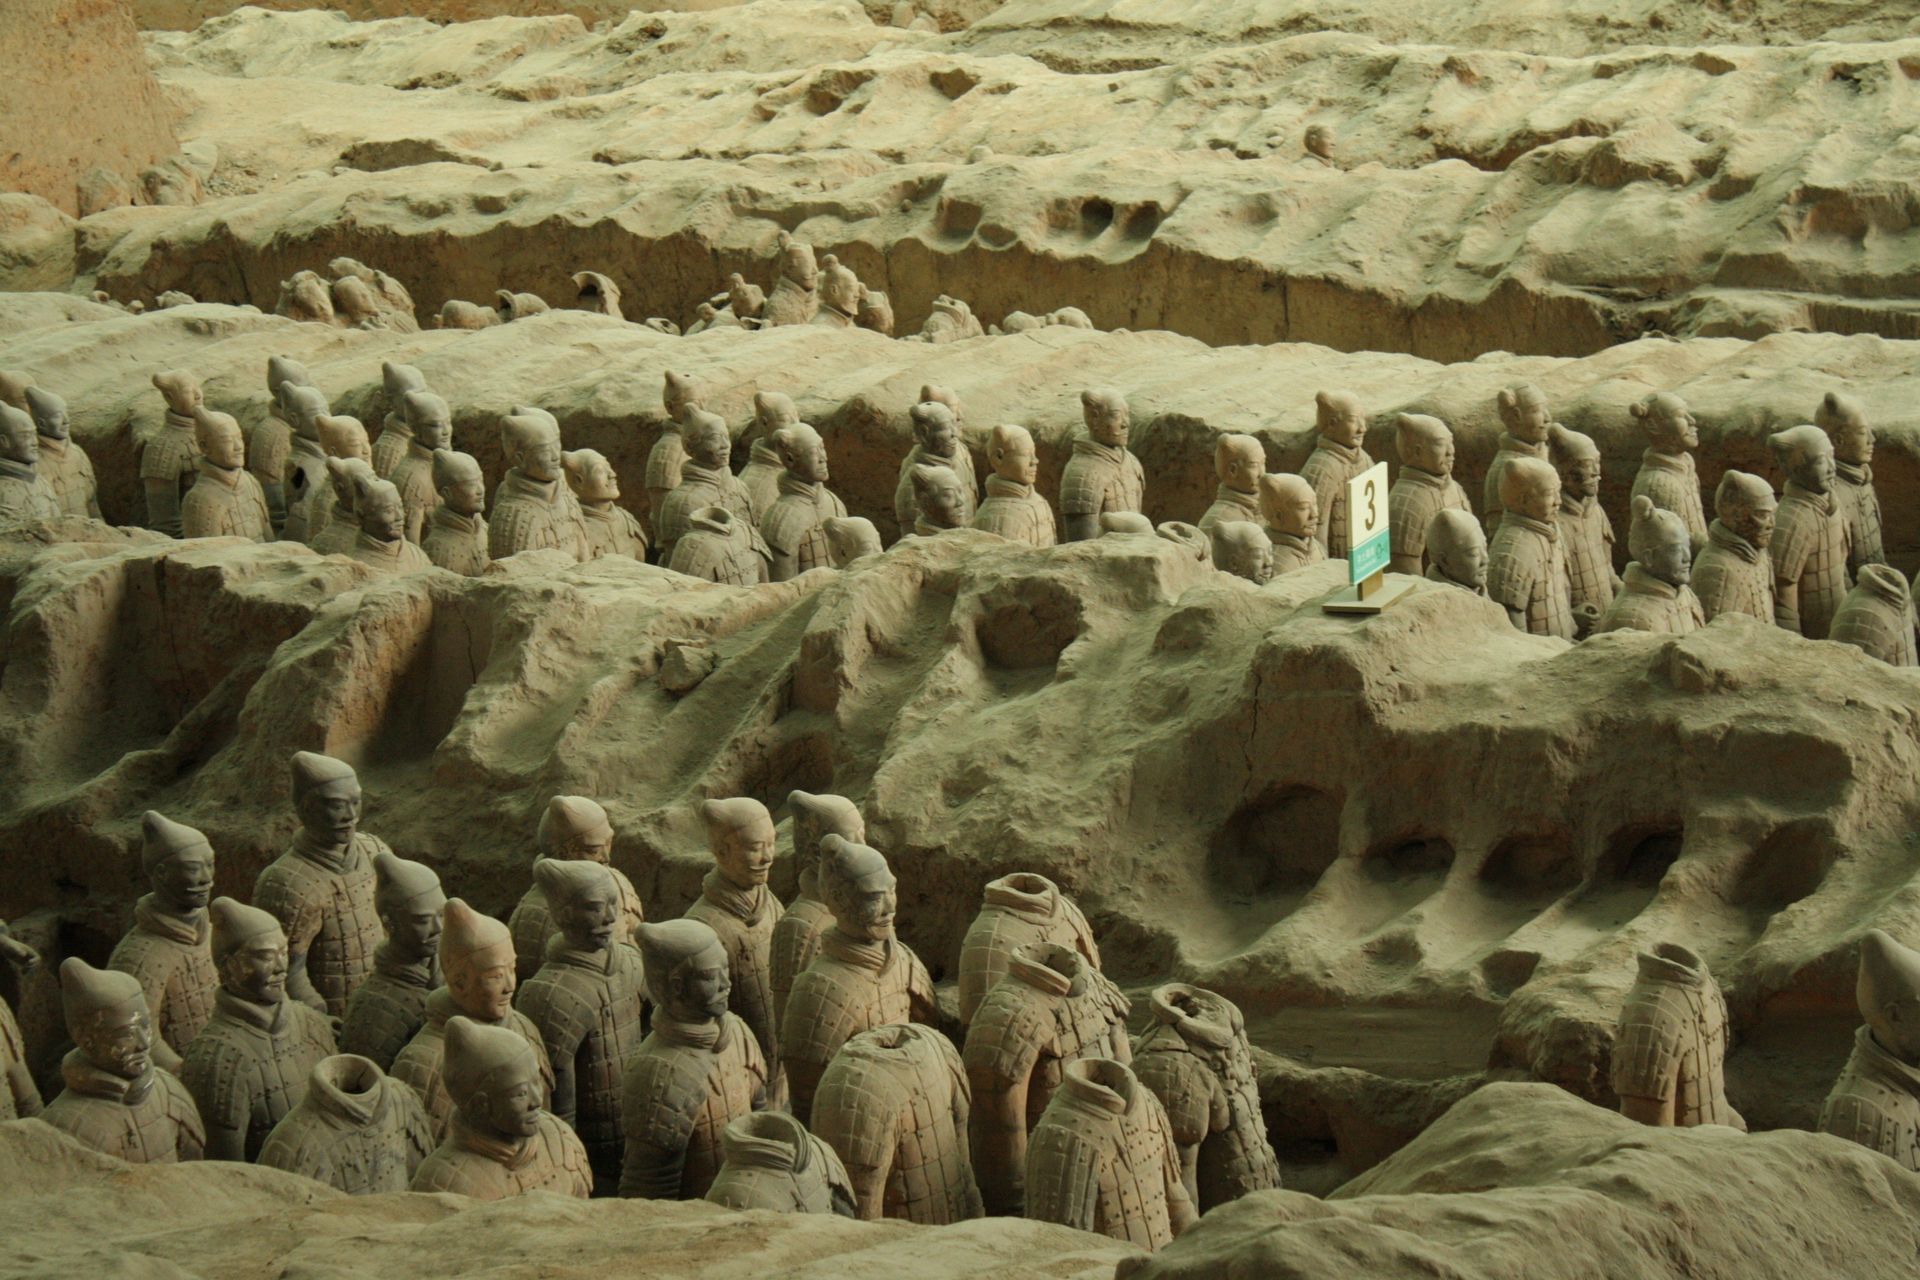 Terracotta Army statues in China